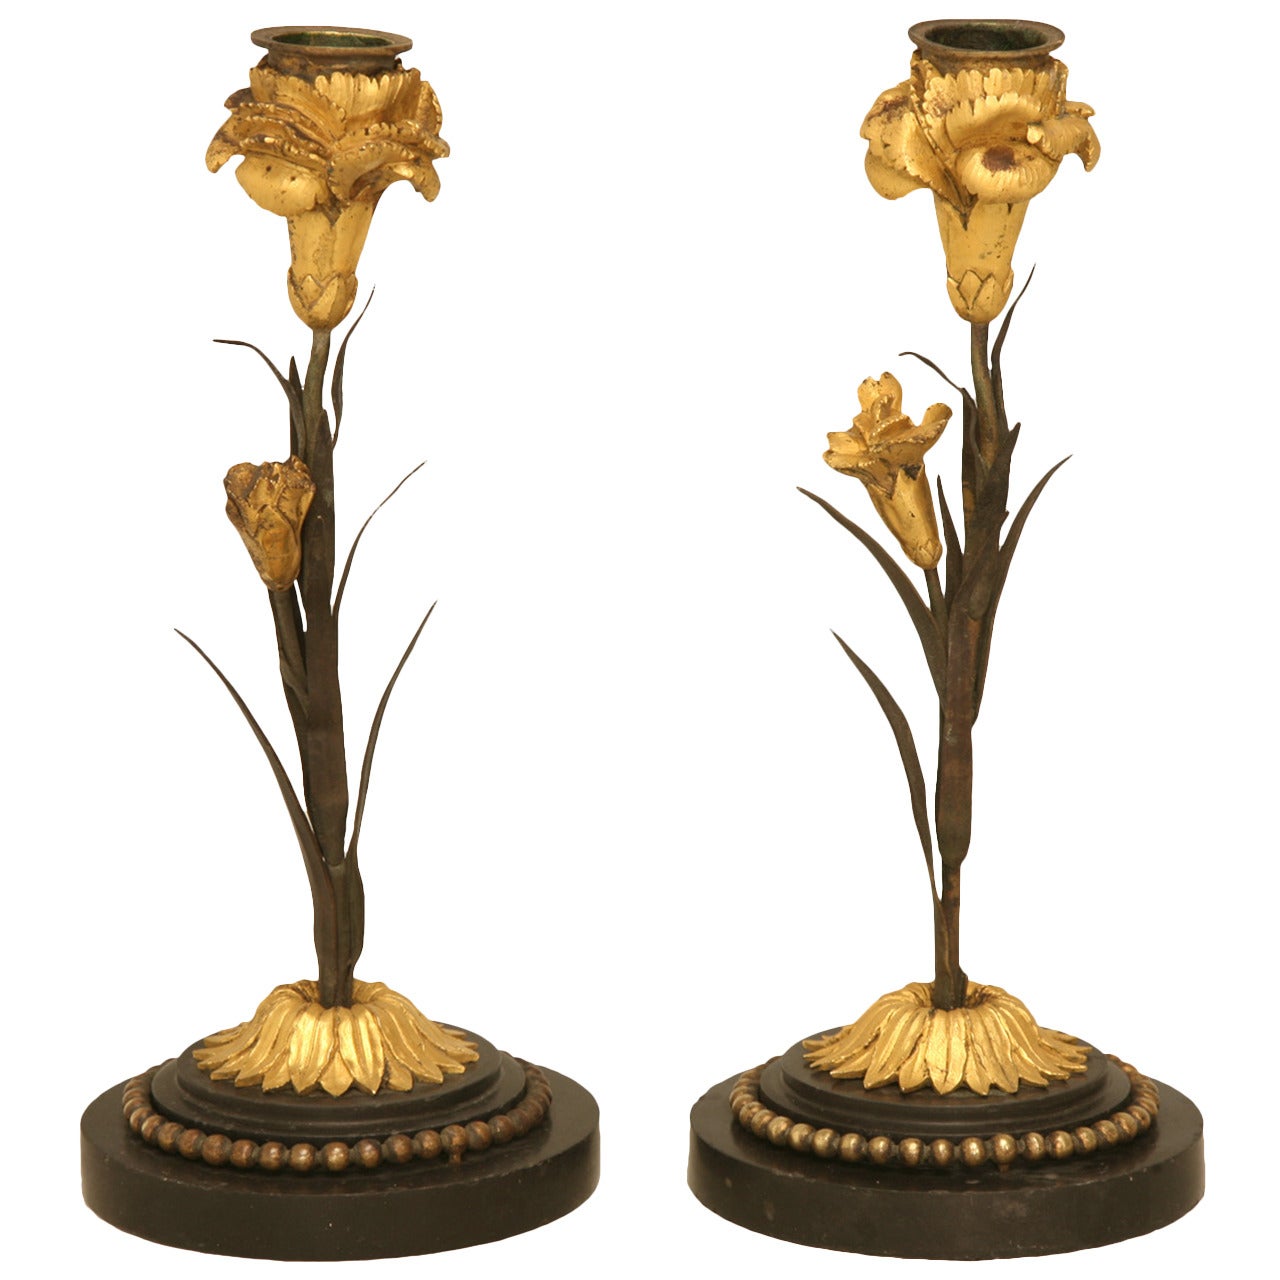 Pair of Magnificent Antique French Dore Candlesticks